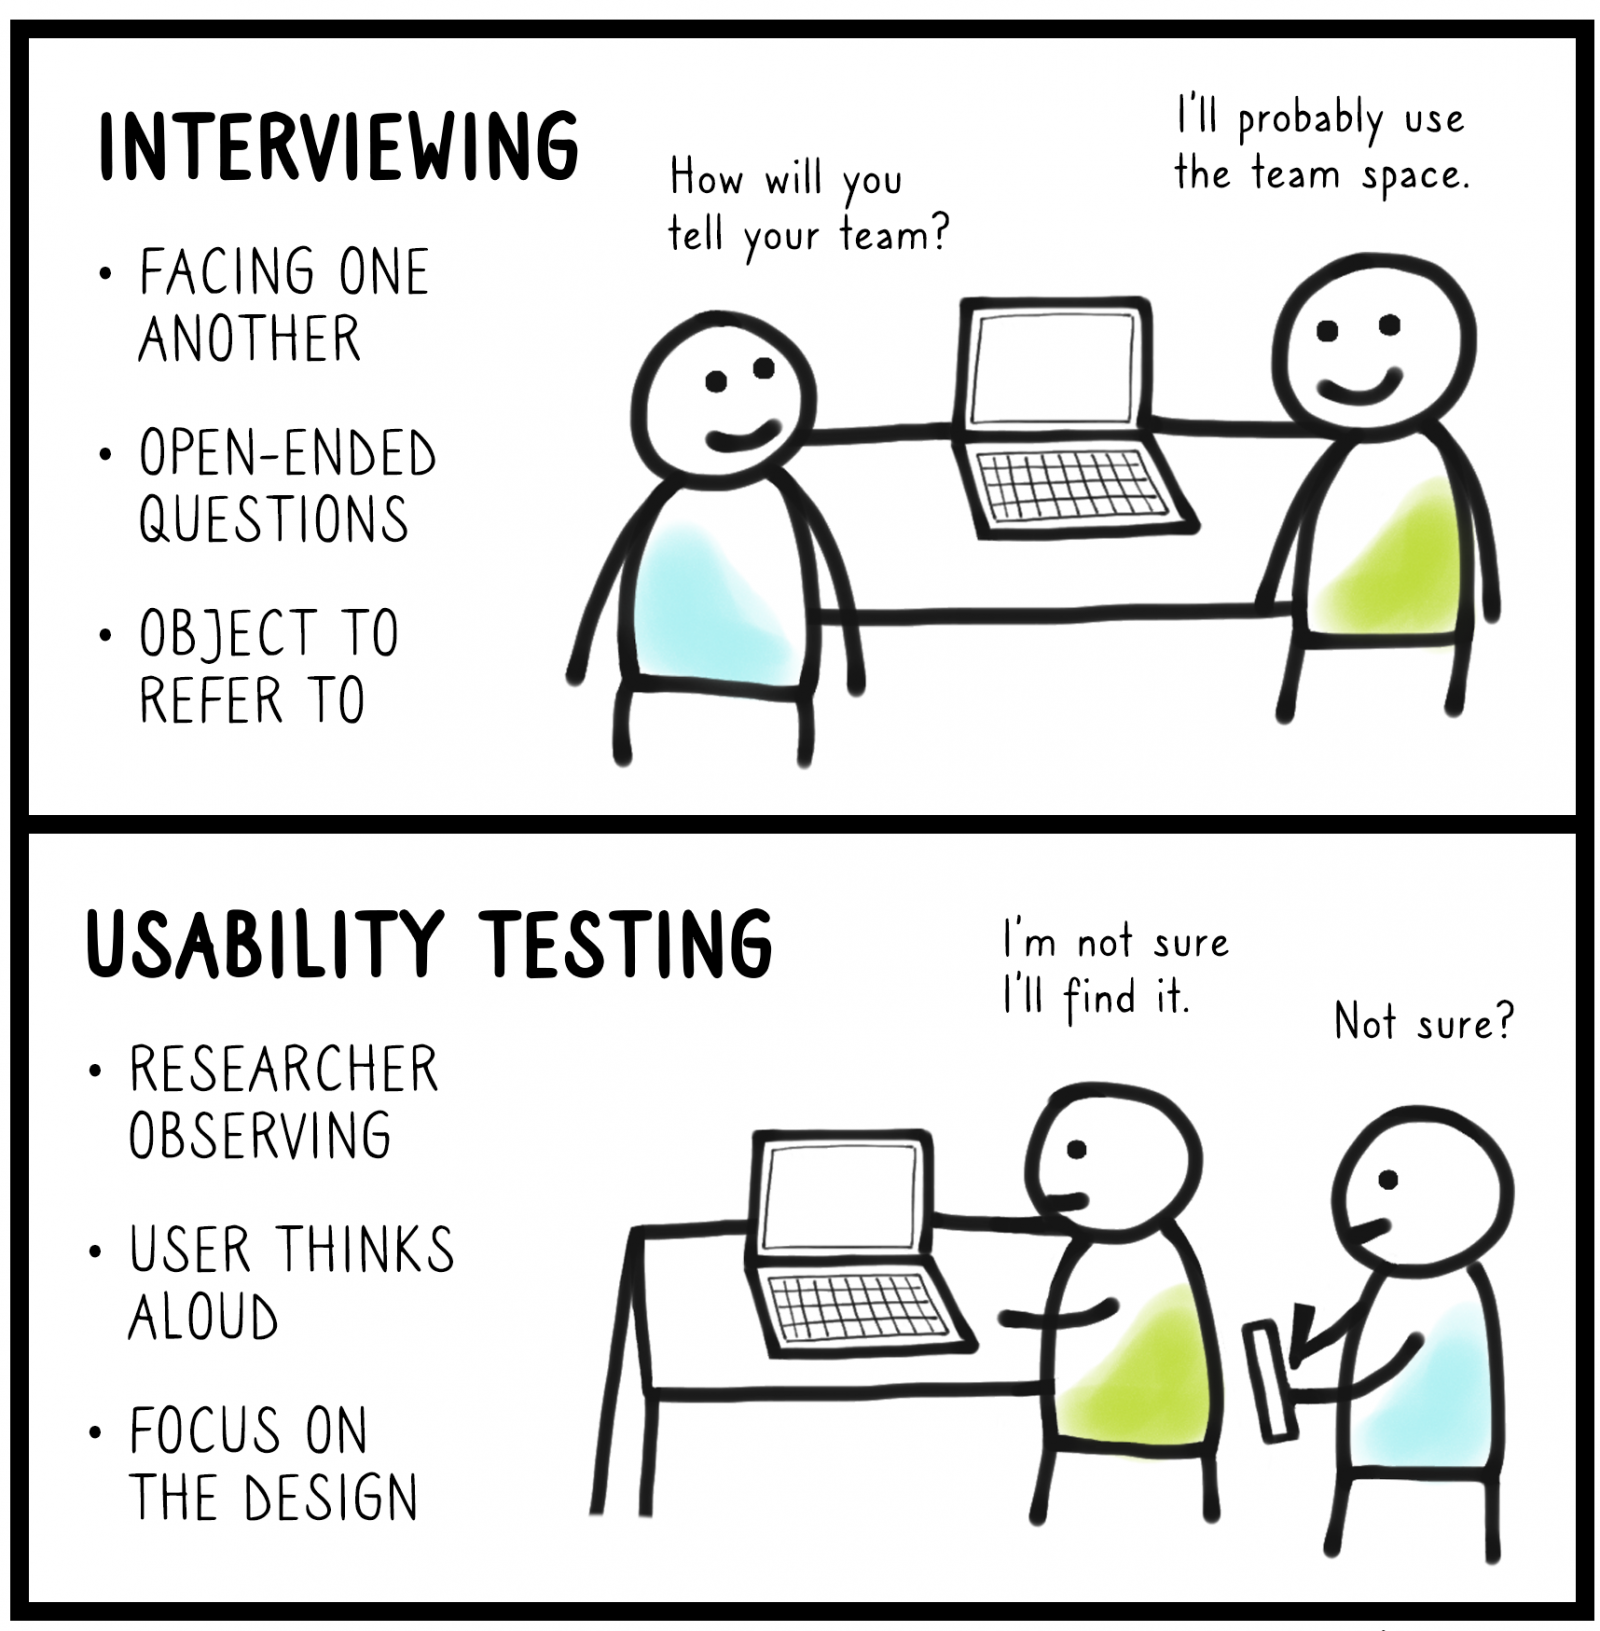 Usability testing is crucial for building diversity